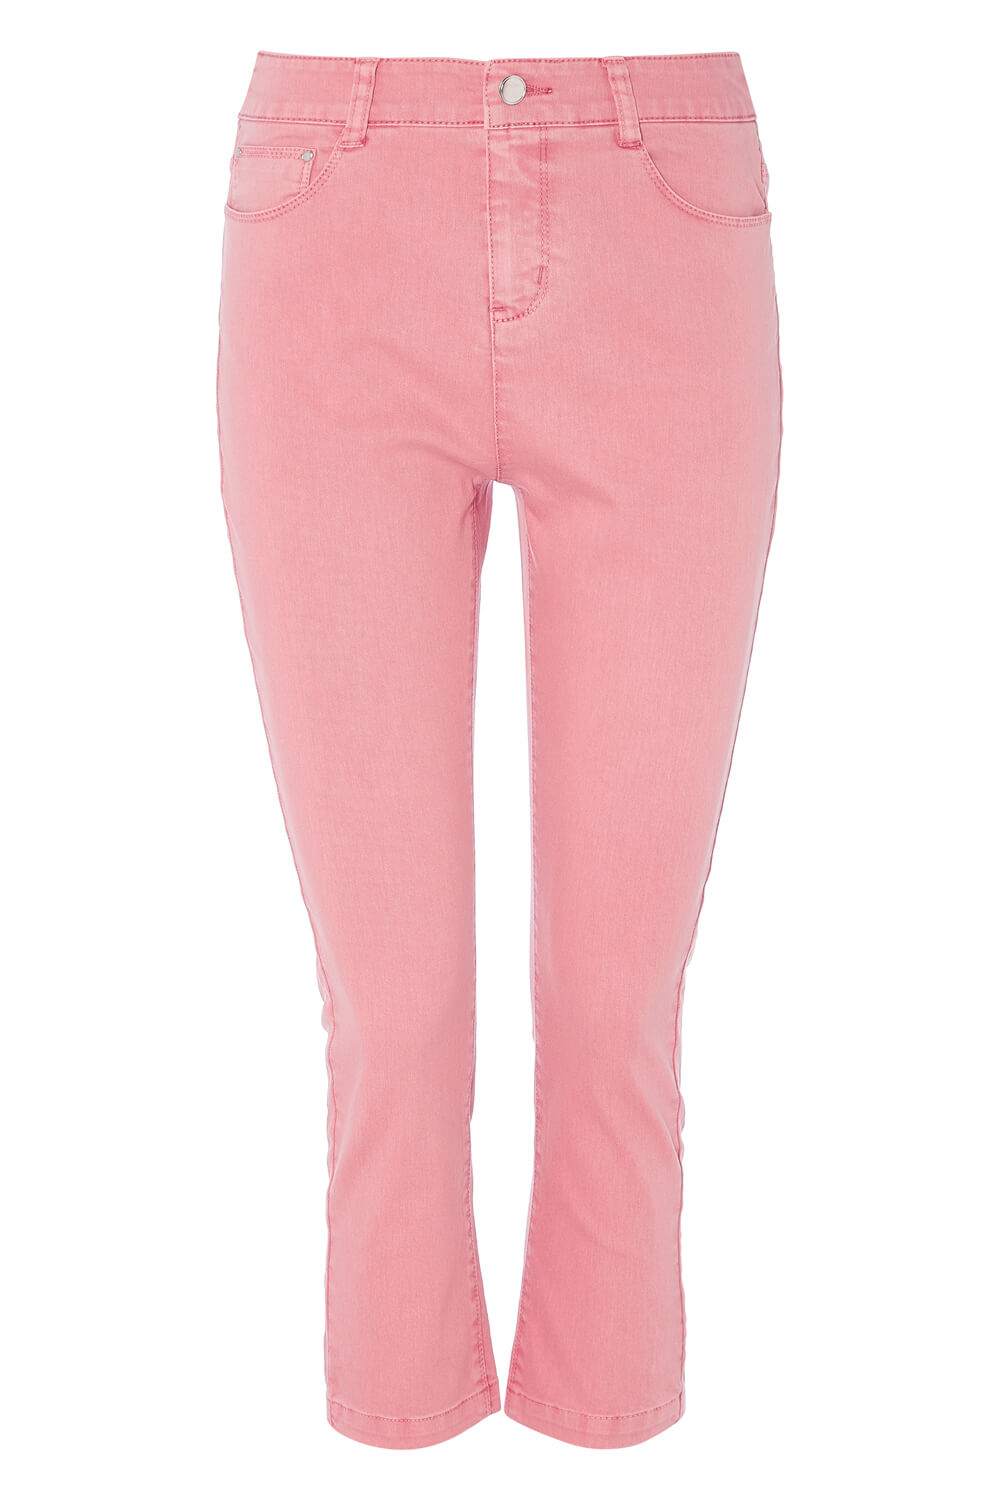 PINK Cropped Jean, Image 4 of 4